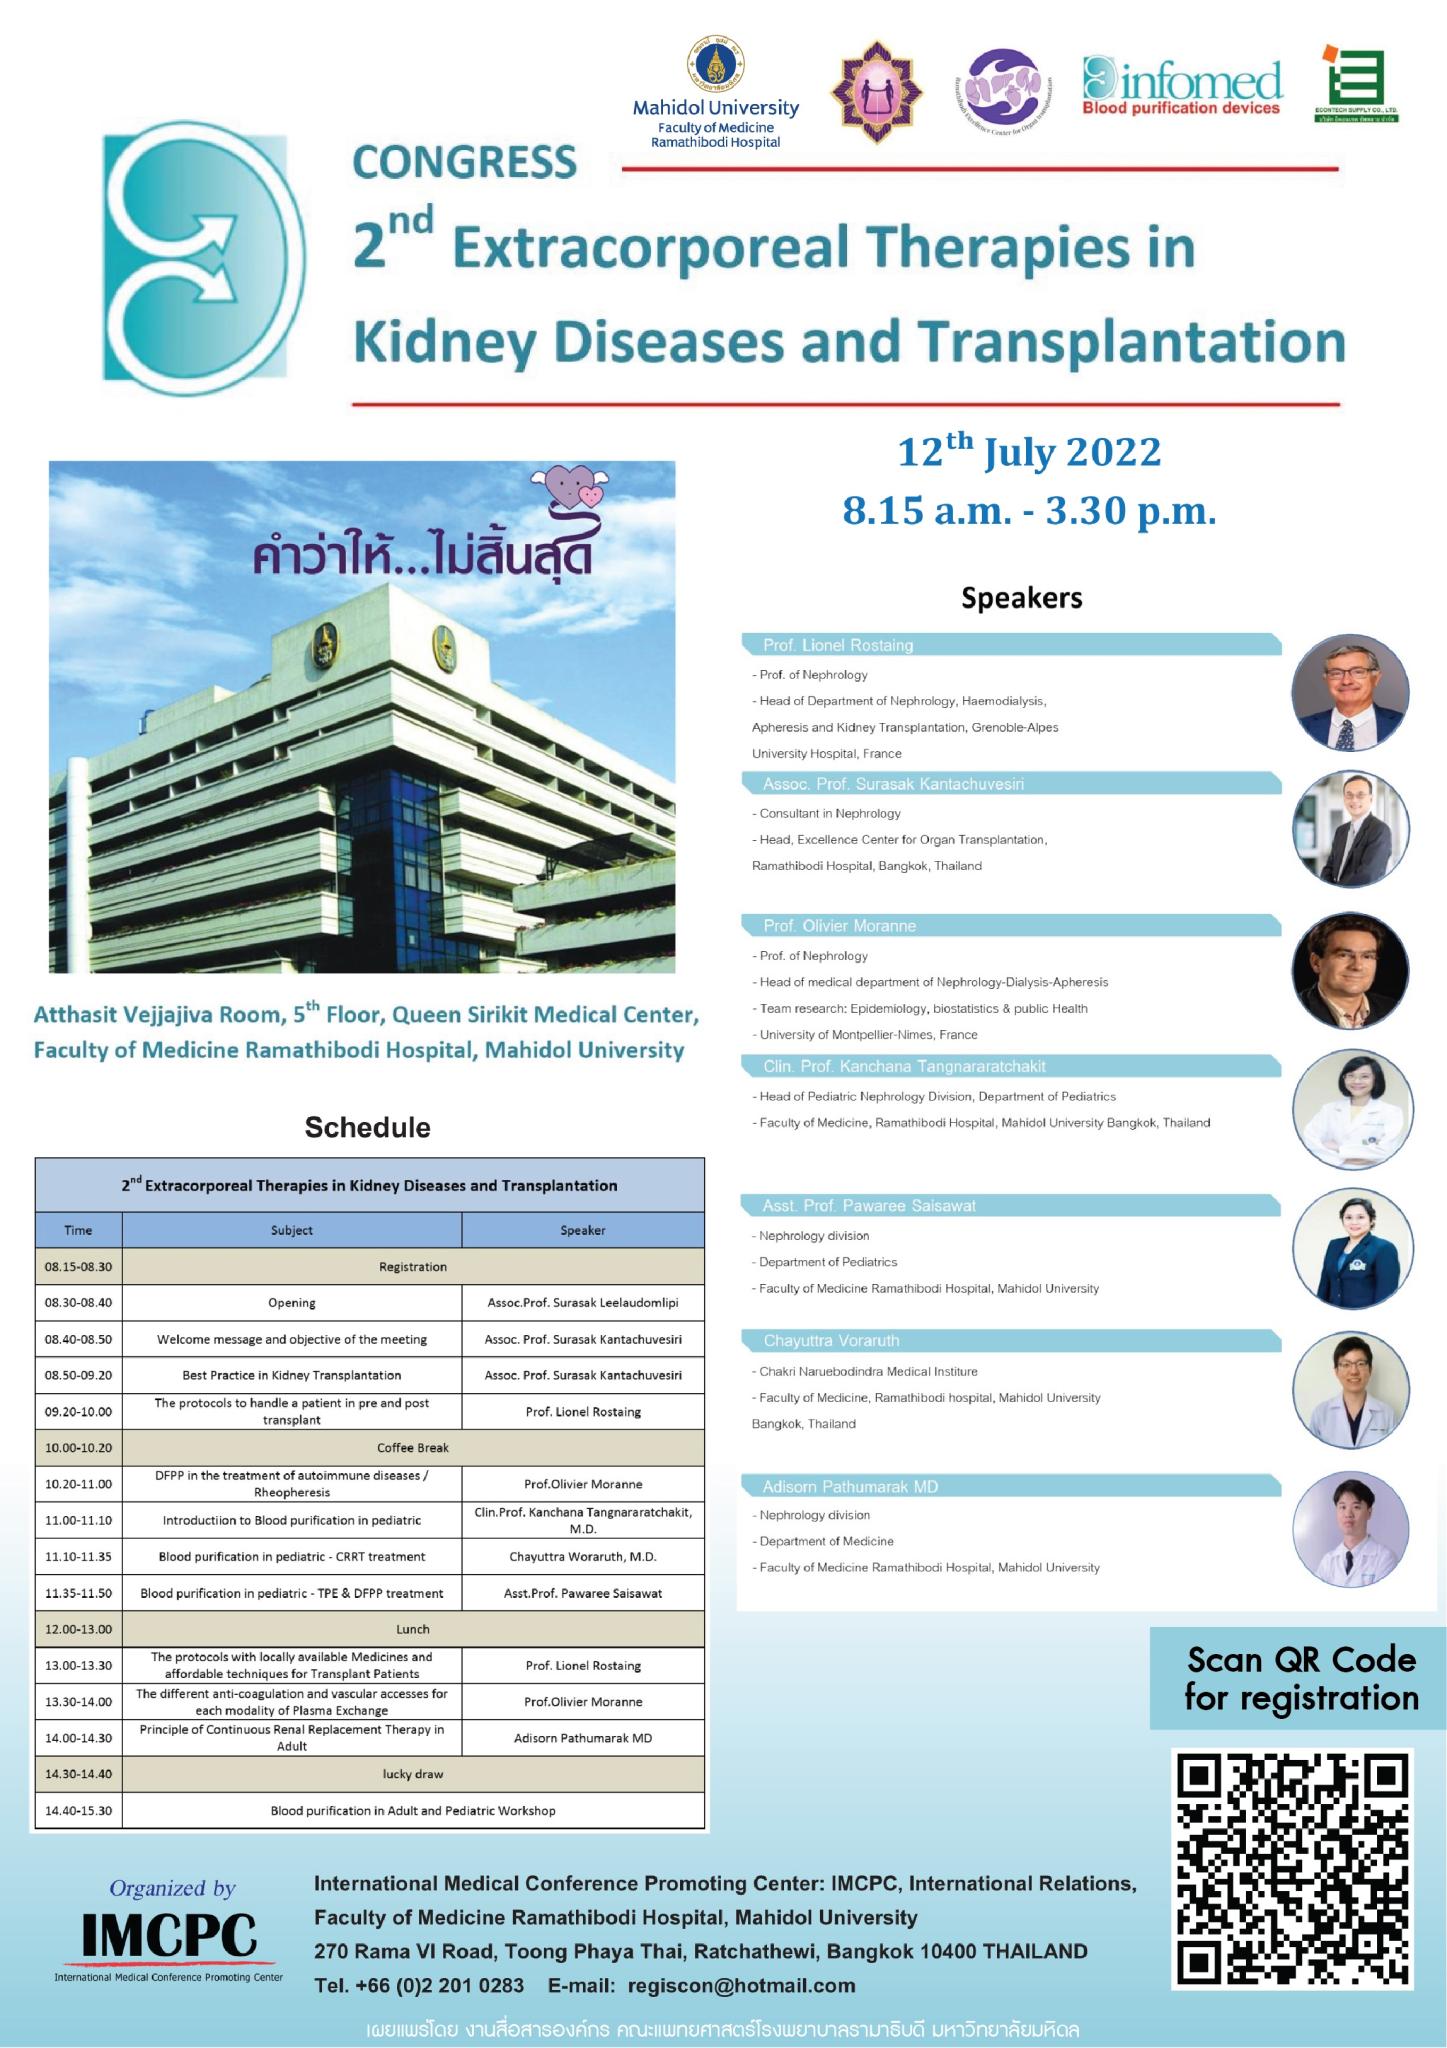 2nd Extracorporeal Therapies in Kidney Diseases and Transplantation